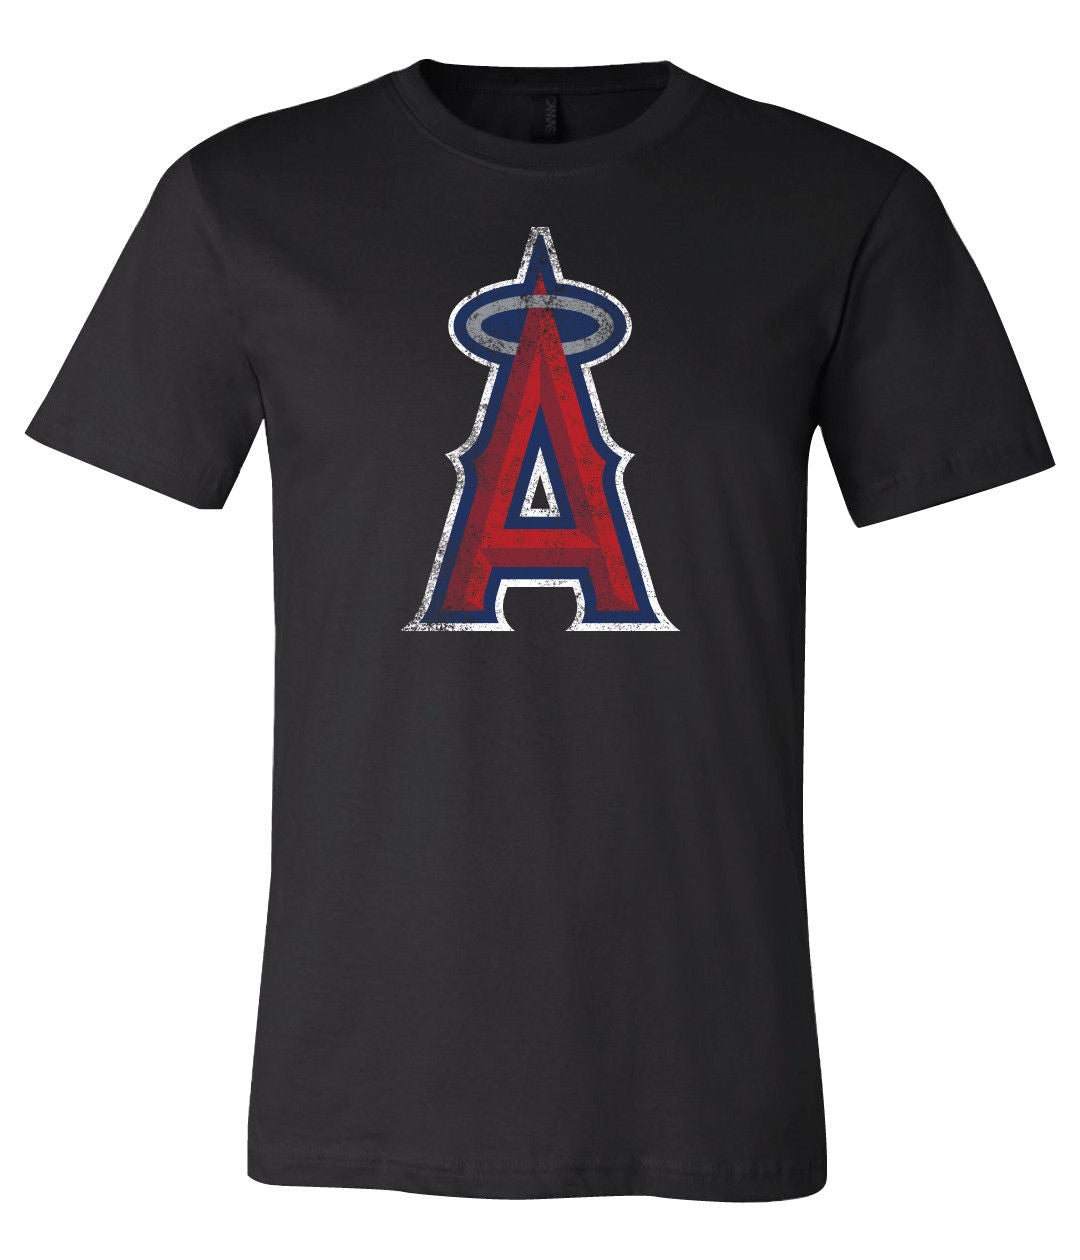 Los Angeles Angels of Anaheim A logo Distressed Vintage T-shirt 6 Size